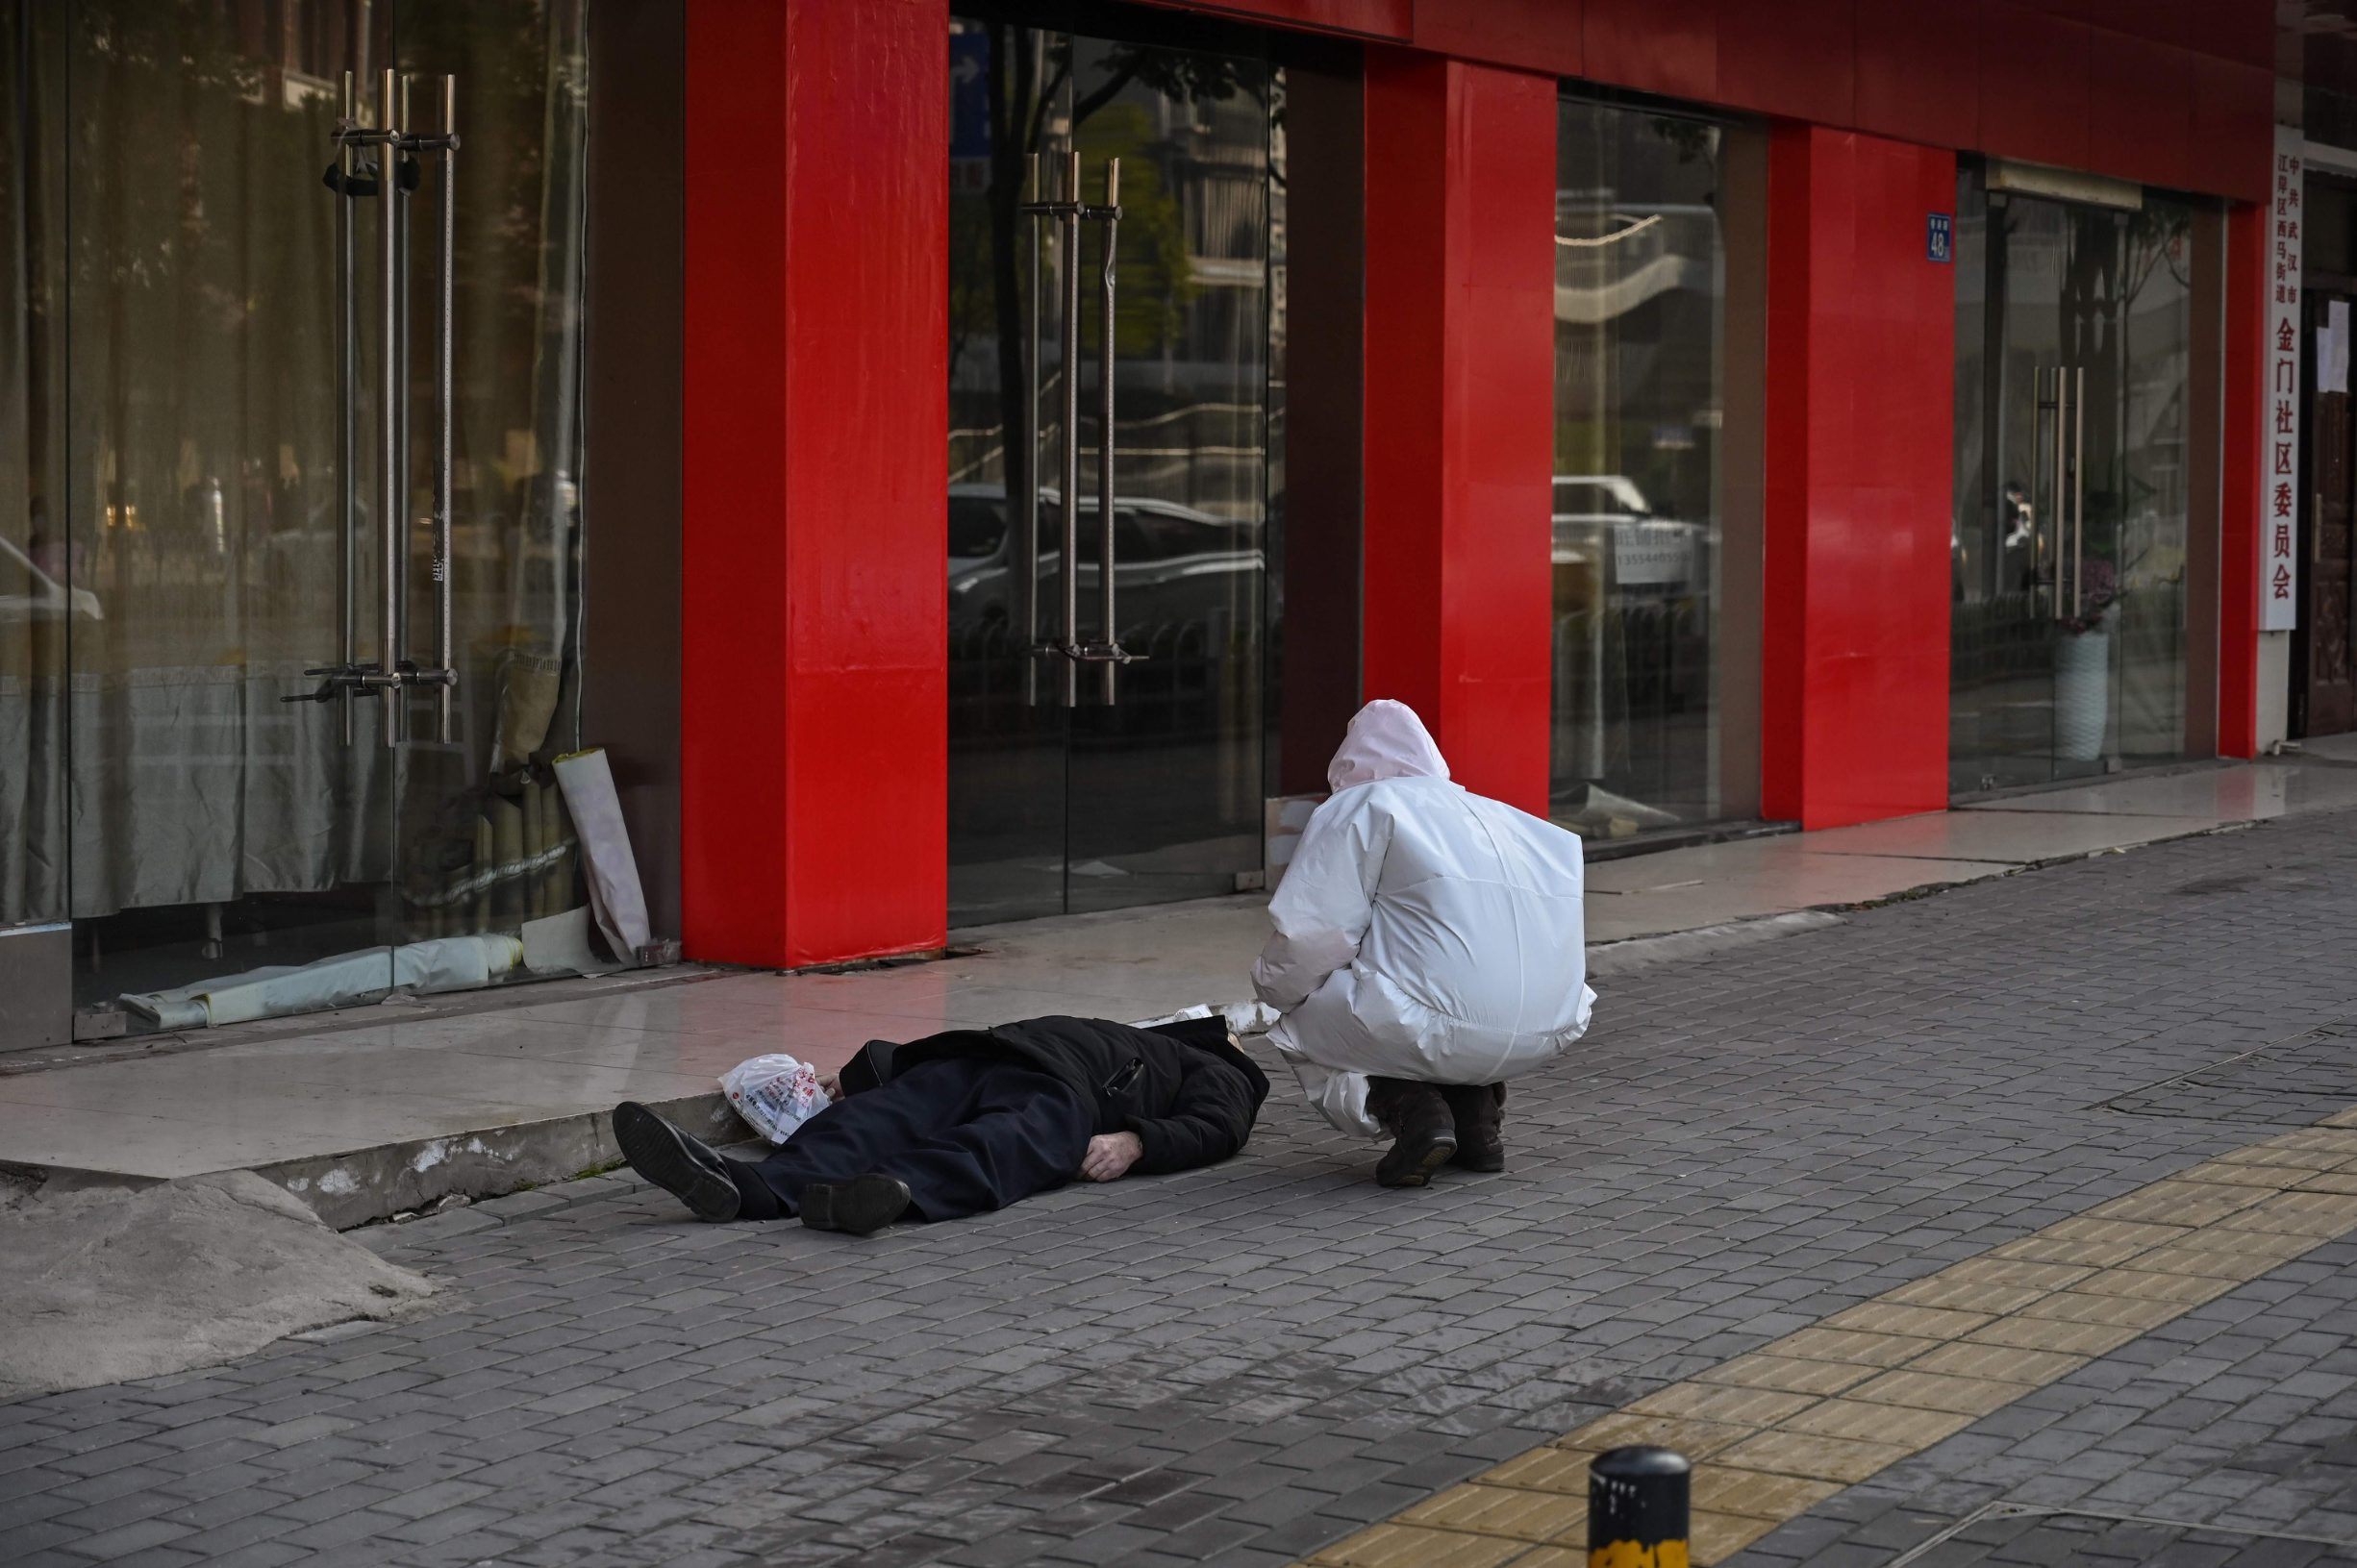 This photo taken on January 30, 2020 shows an official in a protective suit checking on an elderly man wearing a facemask who collapsed and died on a street near a hospital in Wuhan. - AFP journalists saw the body on January 30, not long before an emergency vehicle arrived carrying police and medical staff in full-body protective suits. The World Health Organization declared a global emergency over the new coronavirus, as China reported on January 31 the death toll had climbed to 213 with nearly 10,000 infections. (Photo by Hector RETAMAL / AFP) / TO GO WITH China-health-virus-death,SCENE by Leo RAMIREZ and Sebastien RICCI